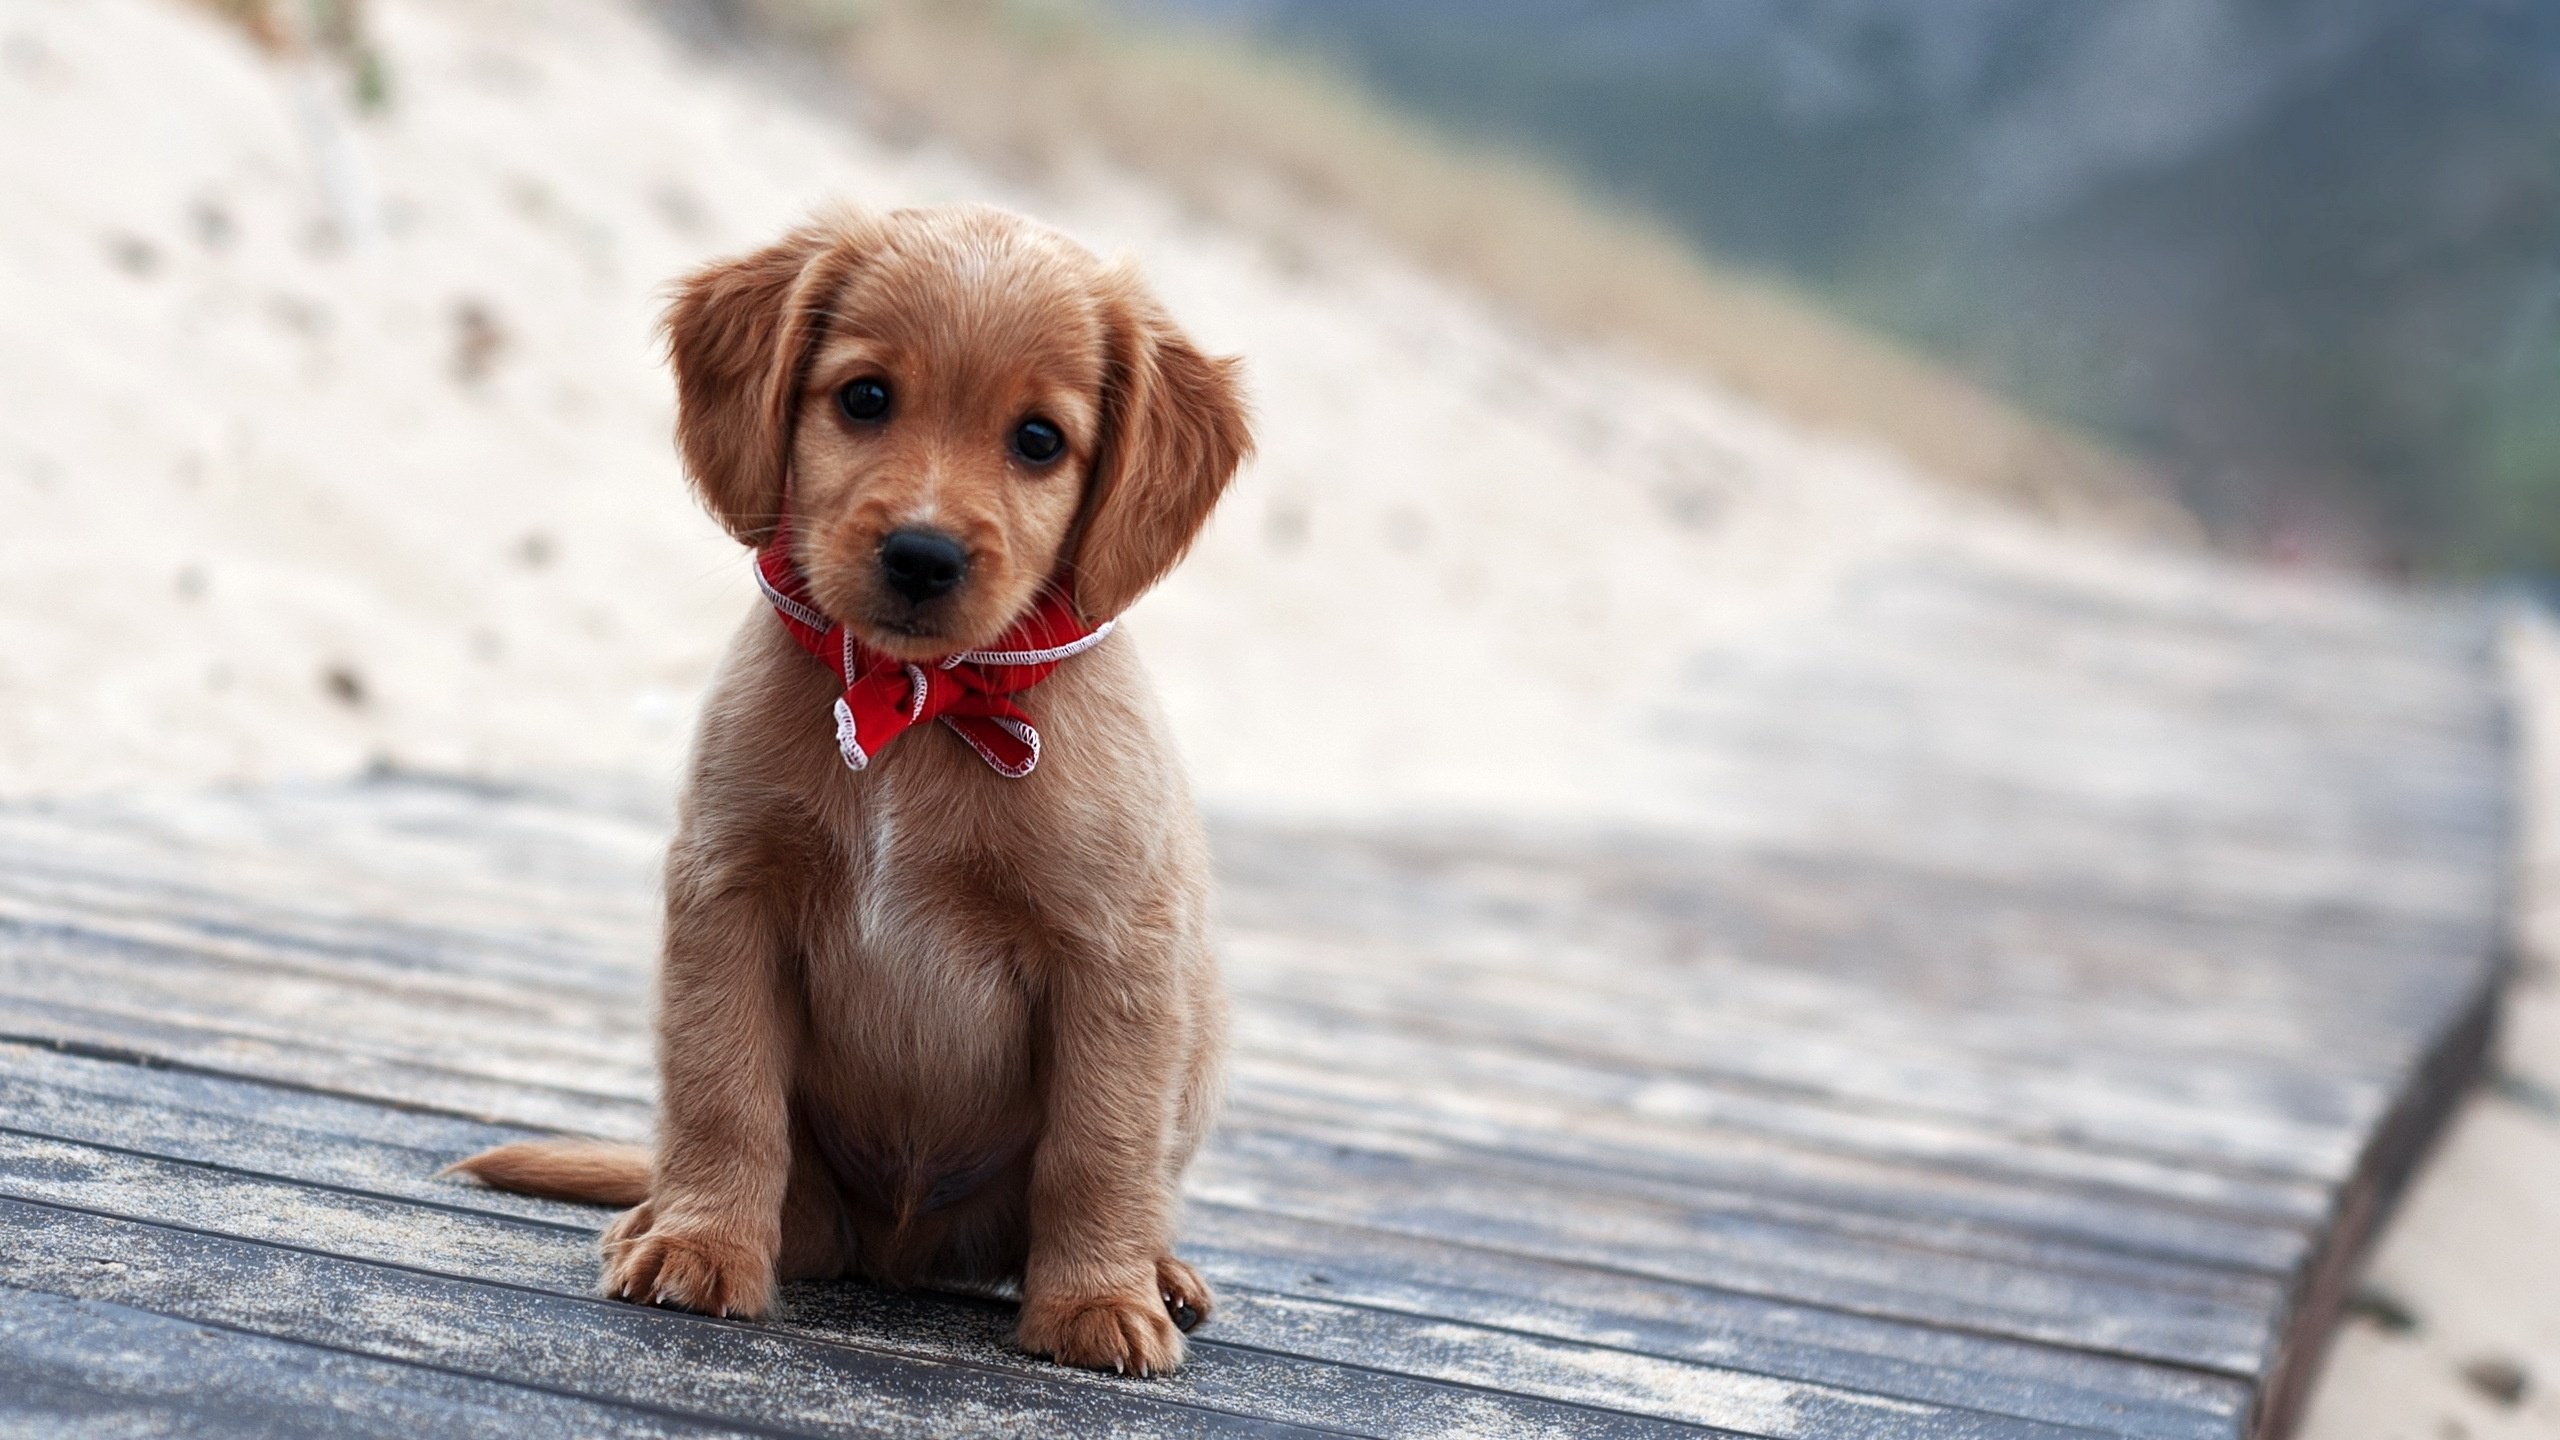 2560x1440 Free Download Cute Puppy Image.